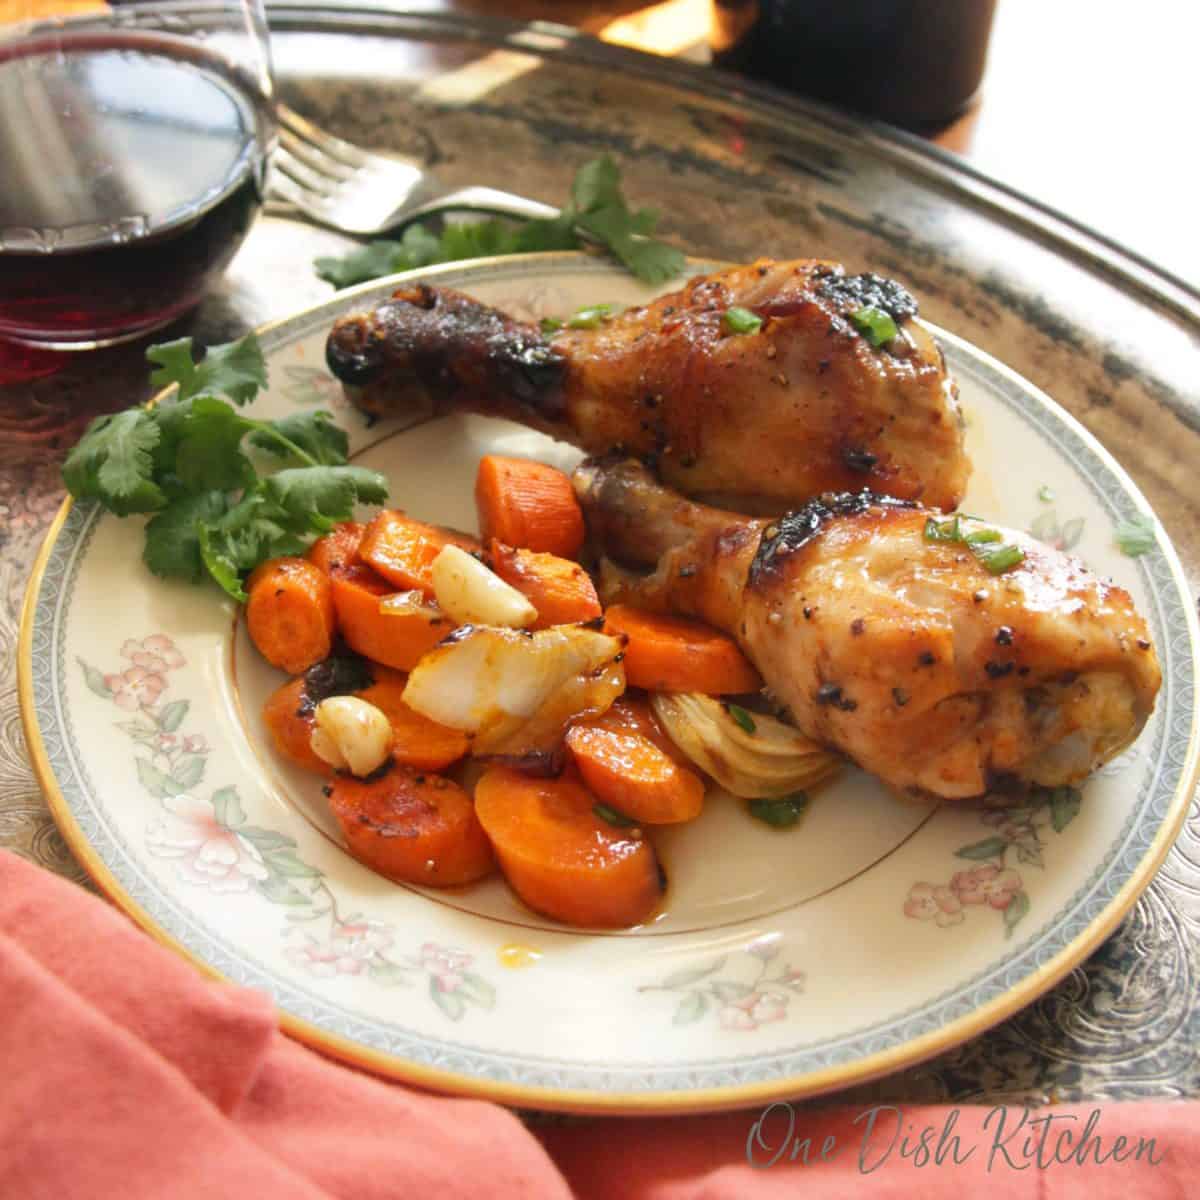 Two bbq chicken drumsticks on a plate with chopped carrots and garlic next to a glass of red wine all on a metal tray.